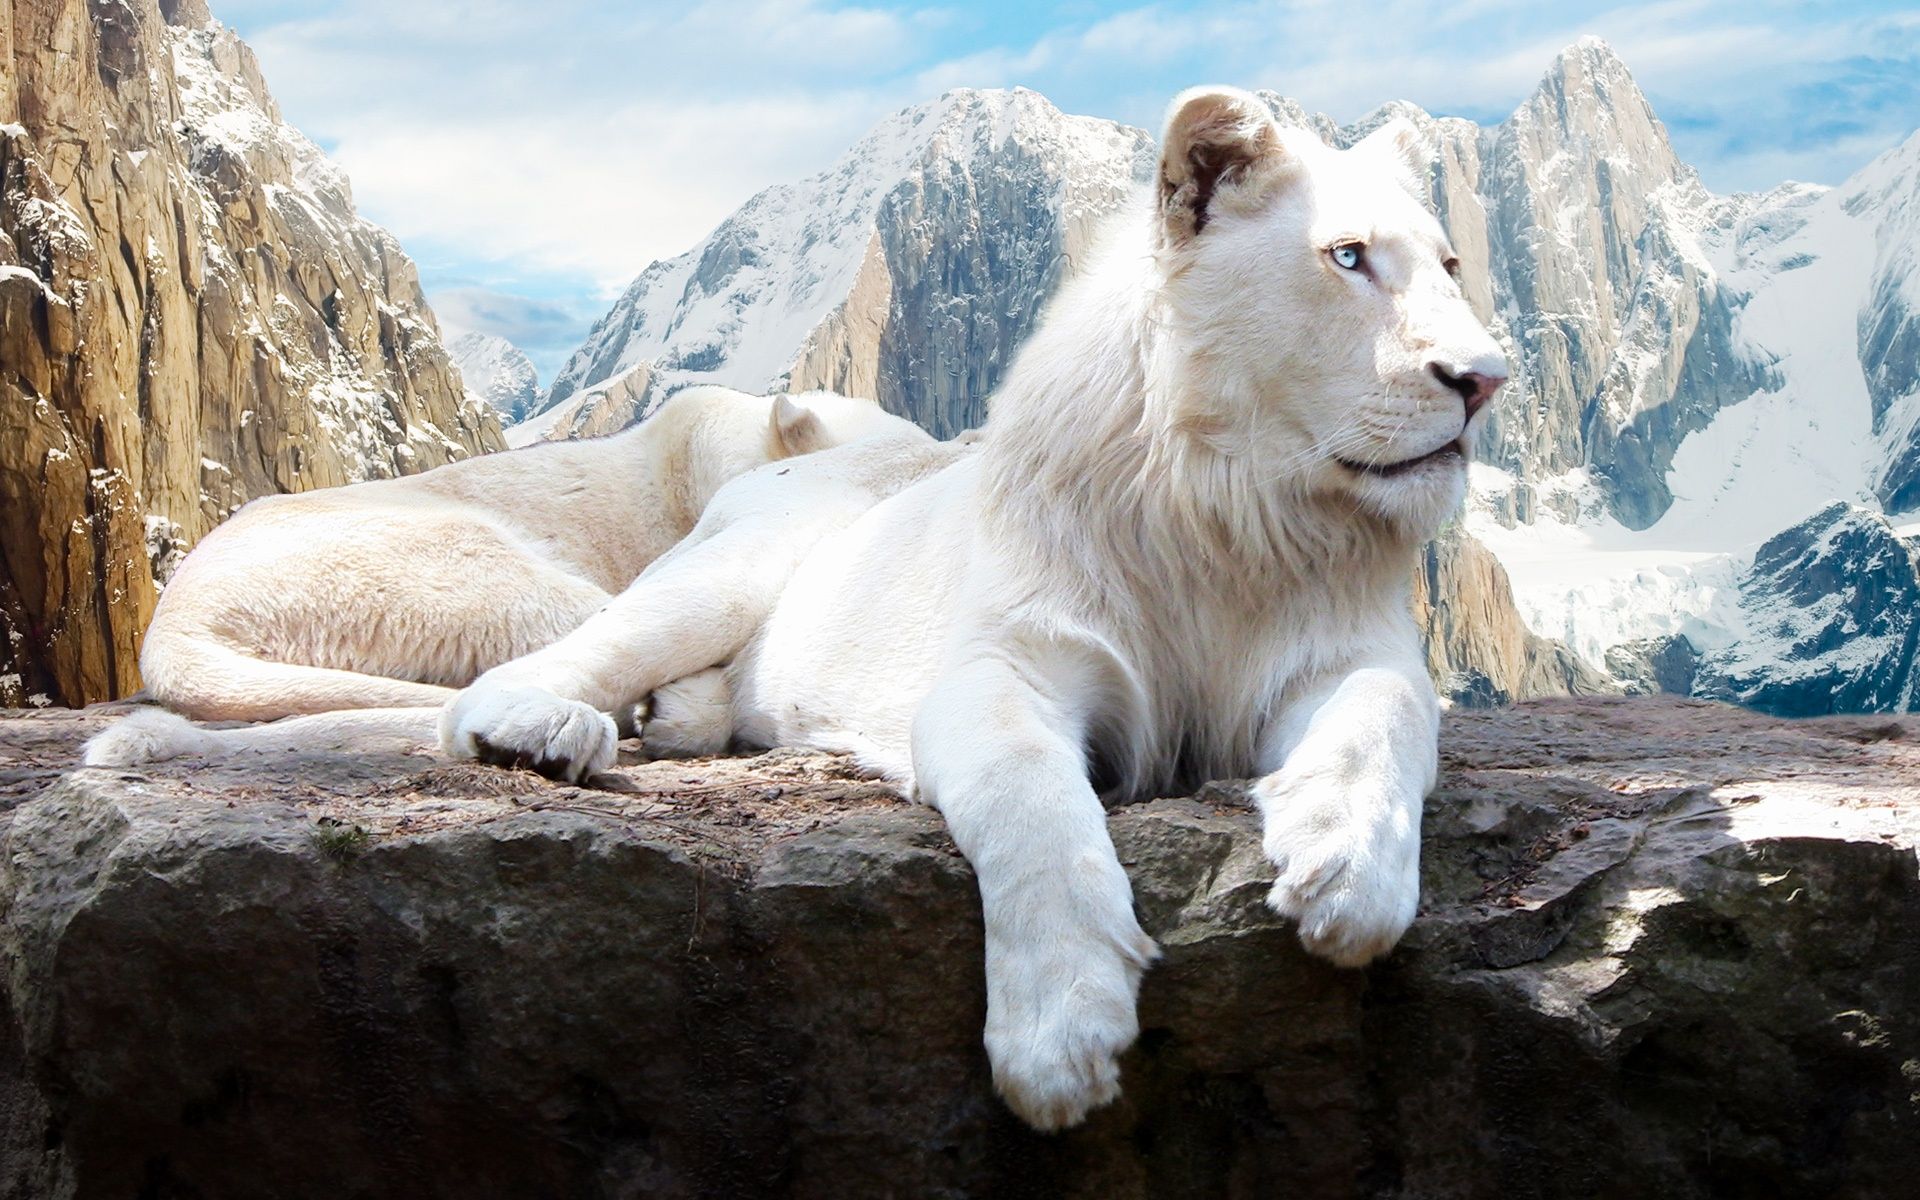 Snow Lion Wallpaper in jpg format for free download